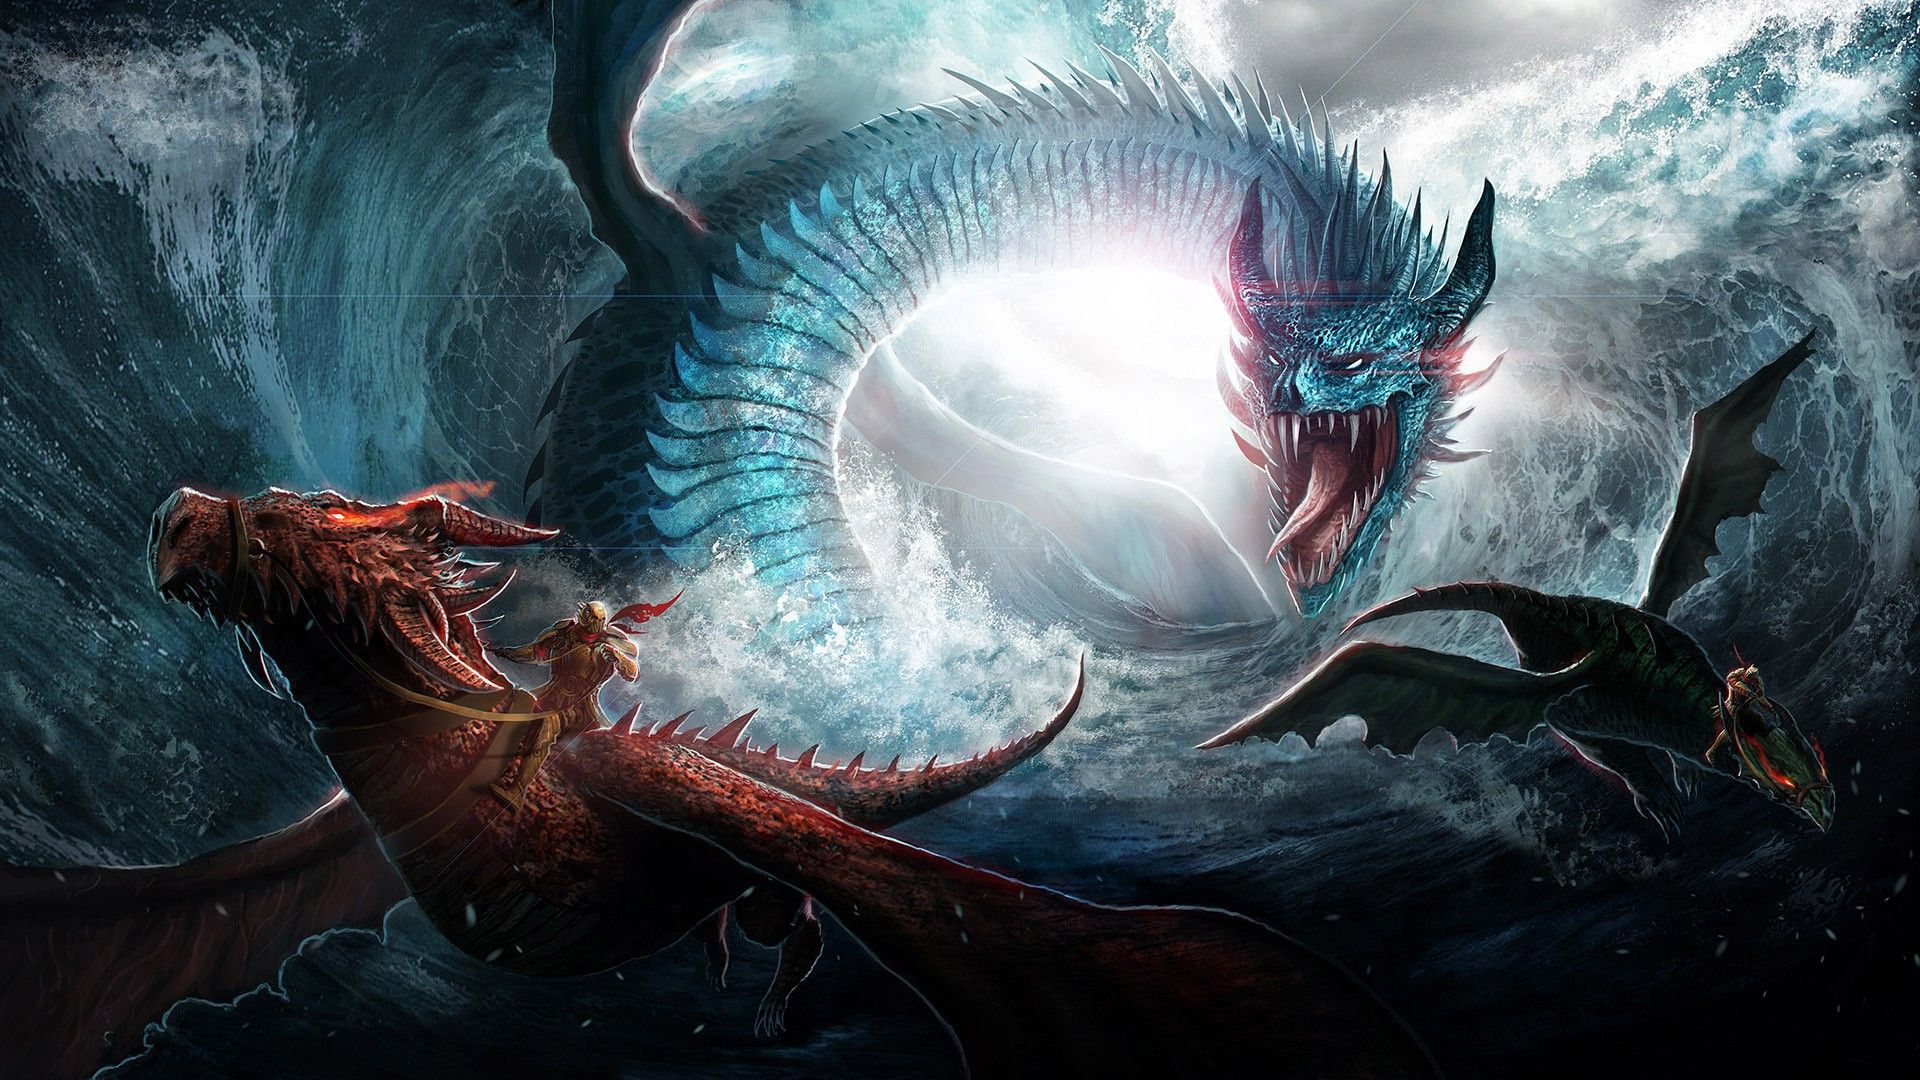 Battle Of Dragons Game Of Thrones 8 Art Wallpapers